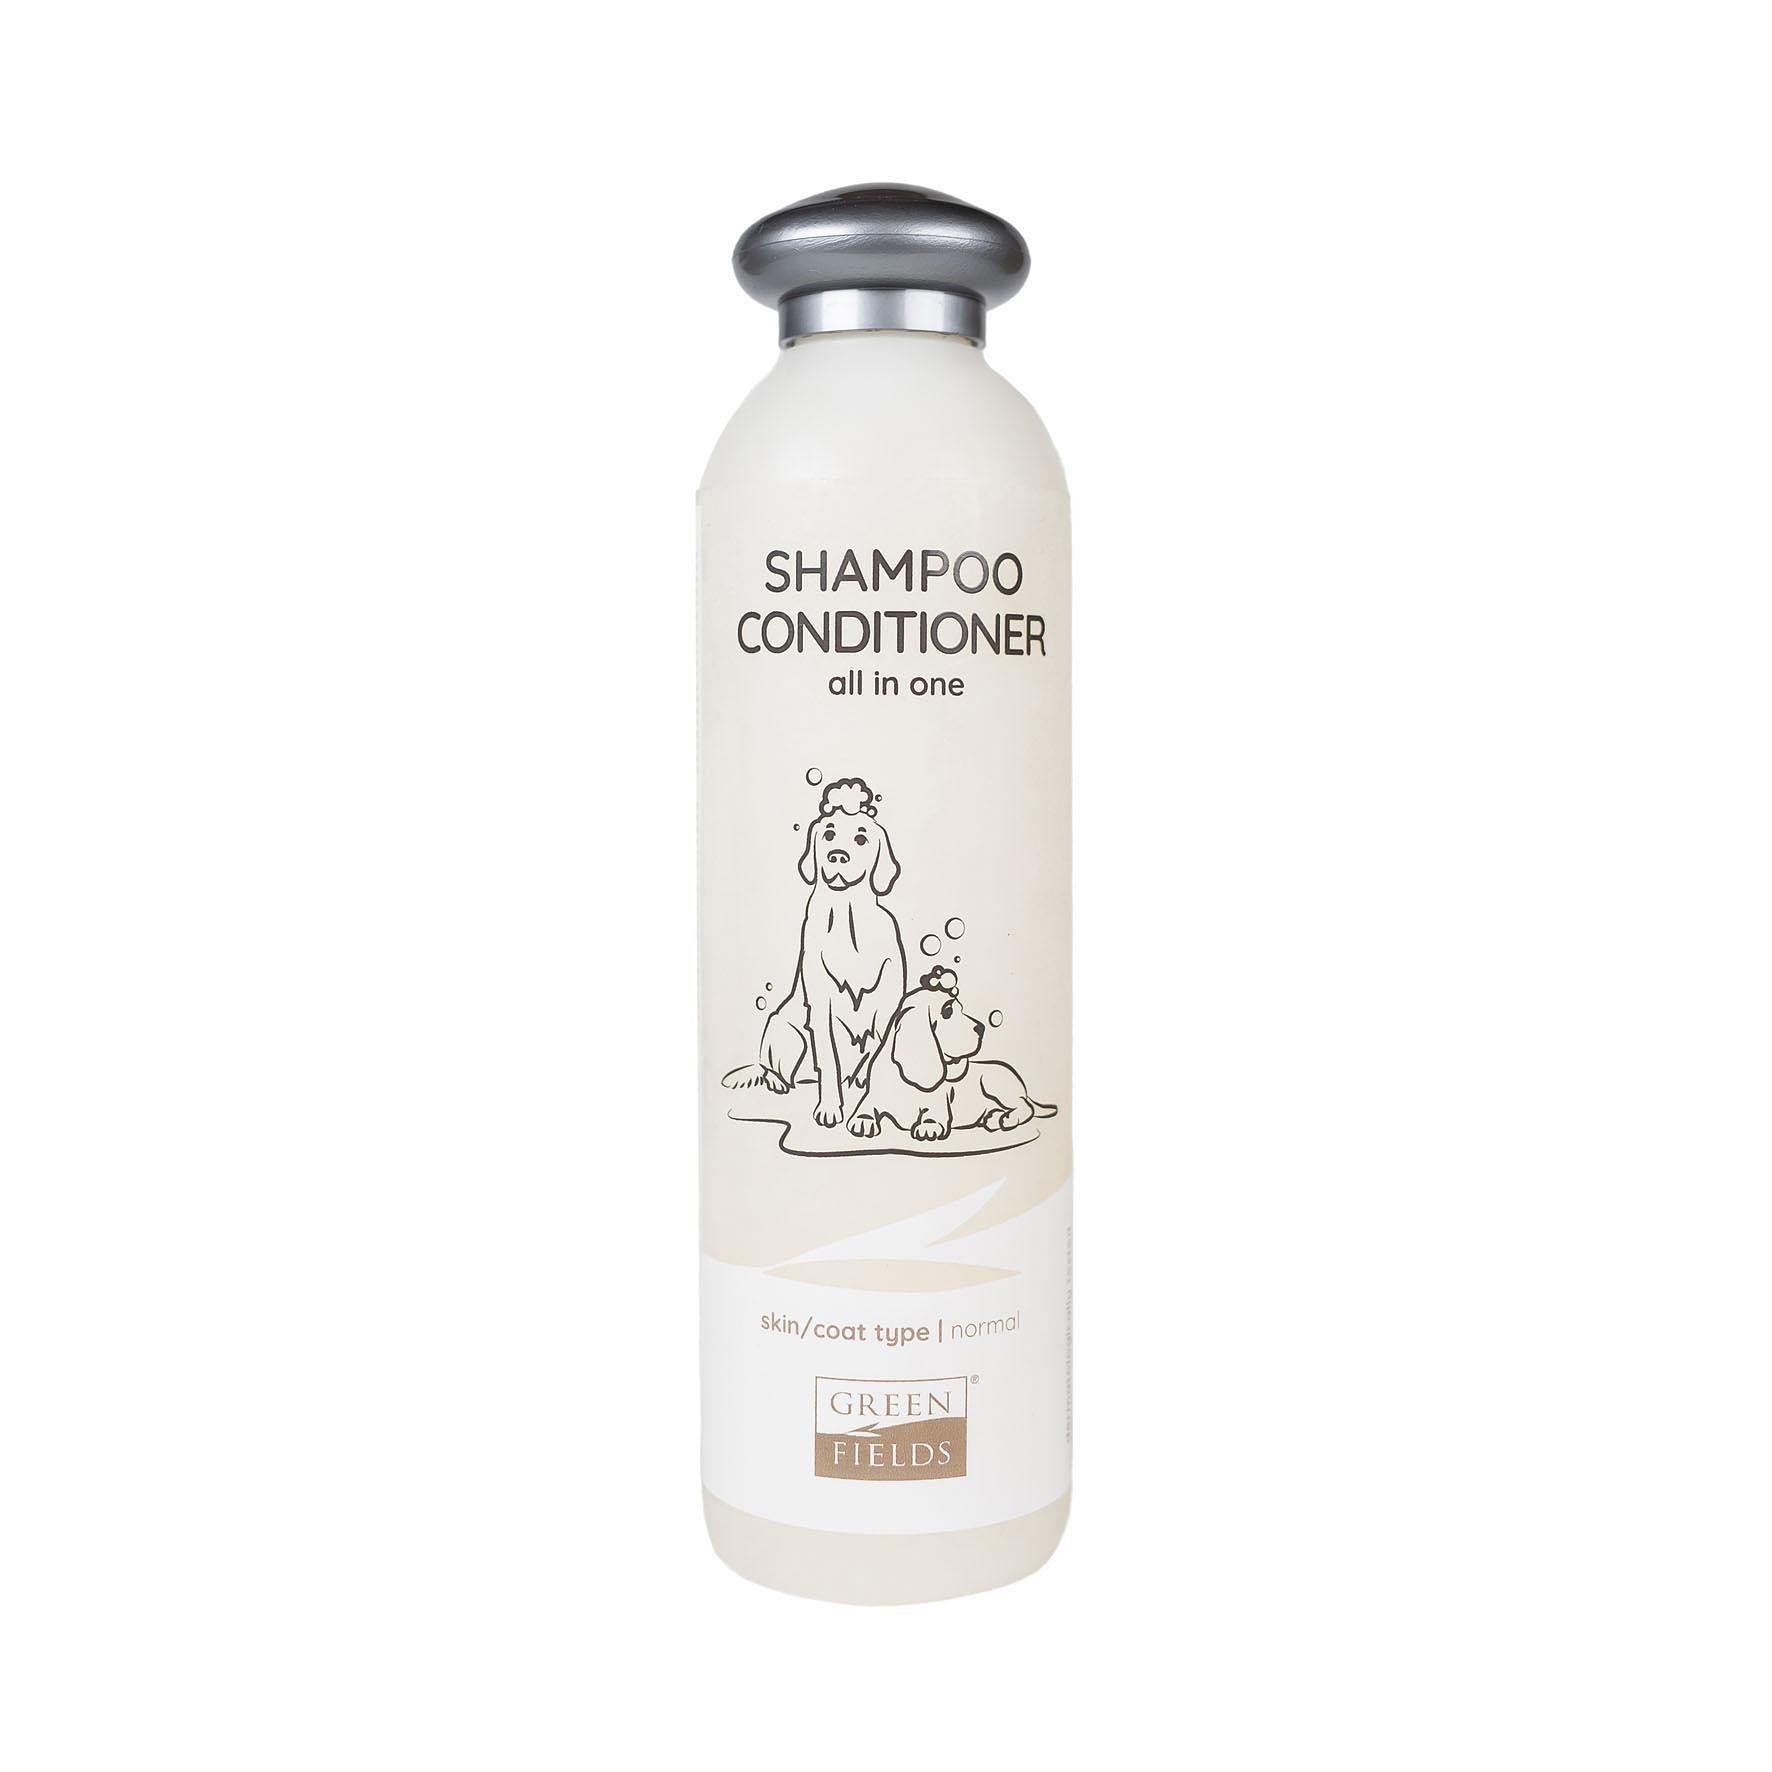 Greenfields shampooing pour chiens